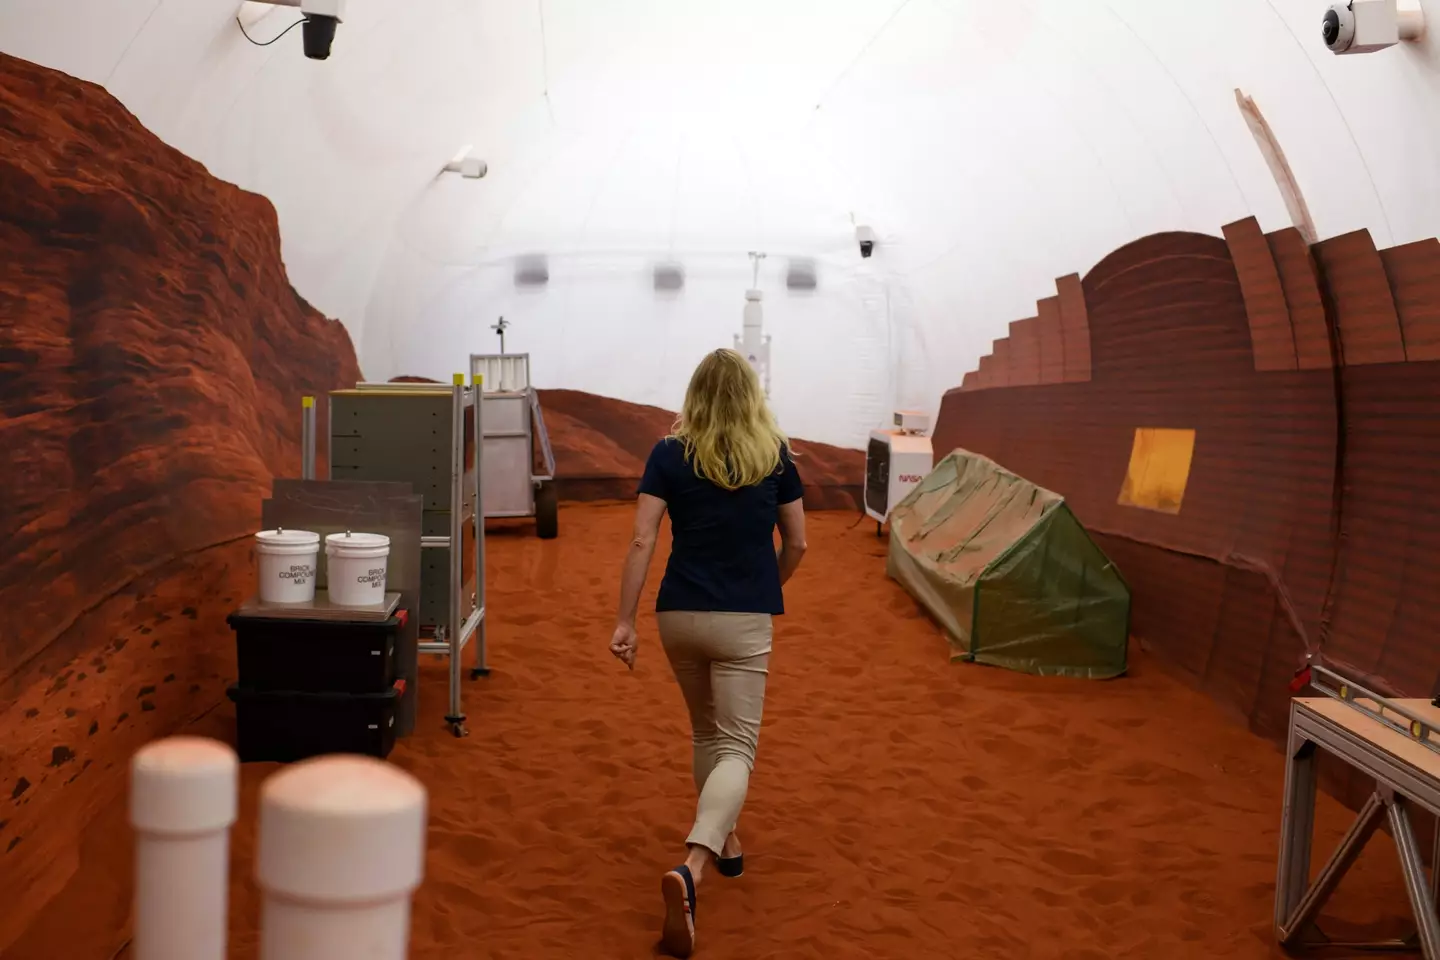 The simulation is meant to feel exactly like living on Mars.